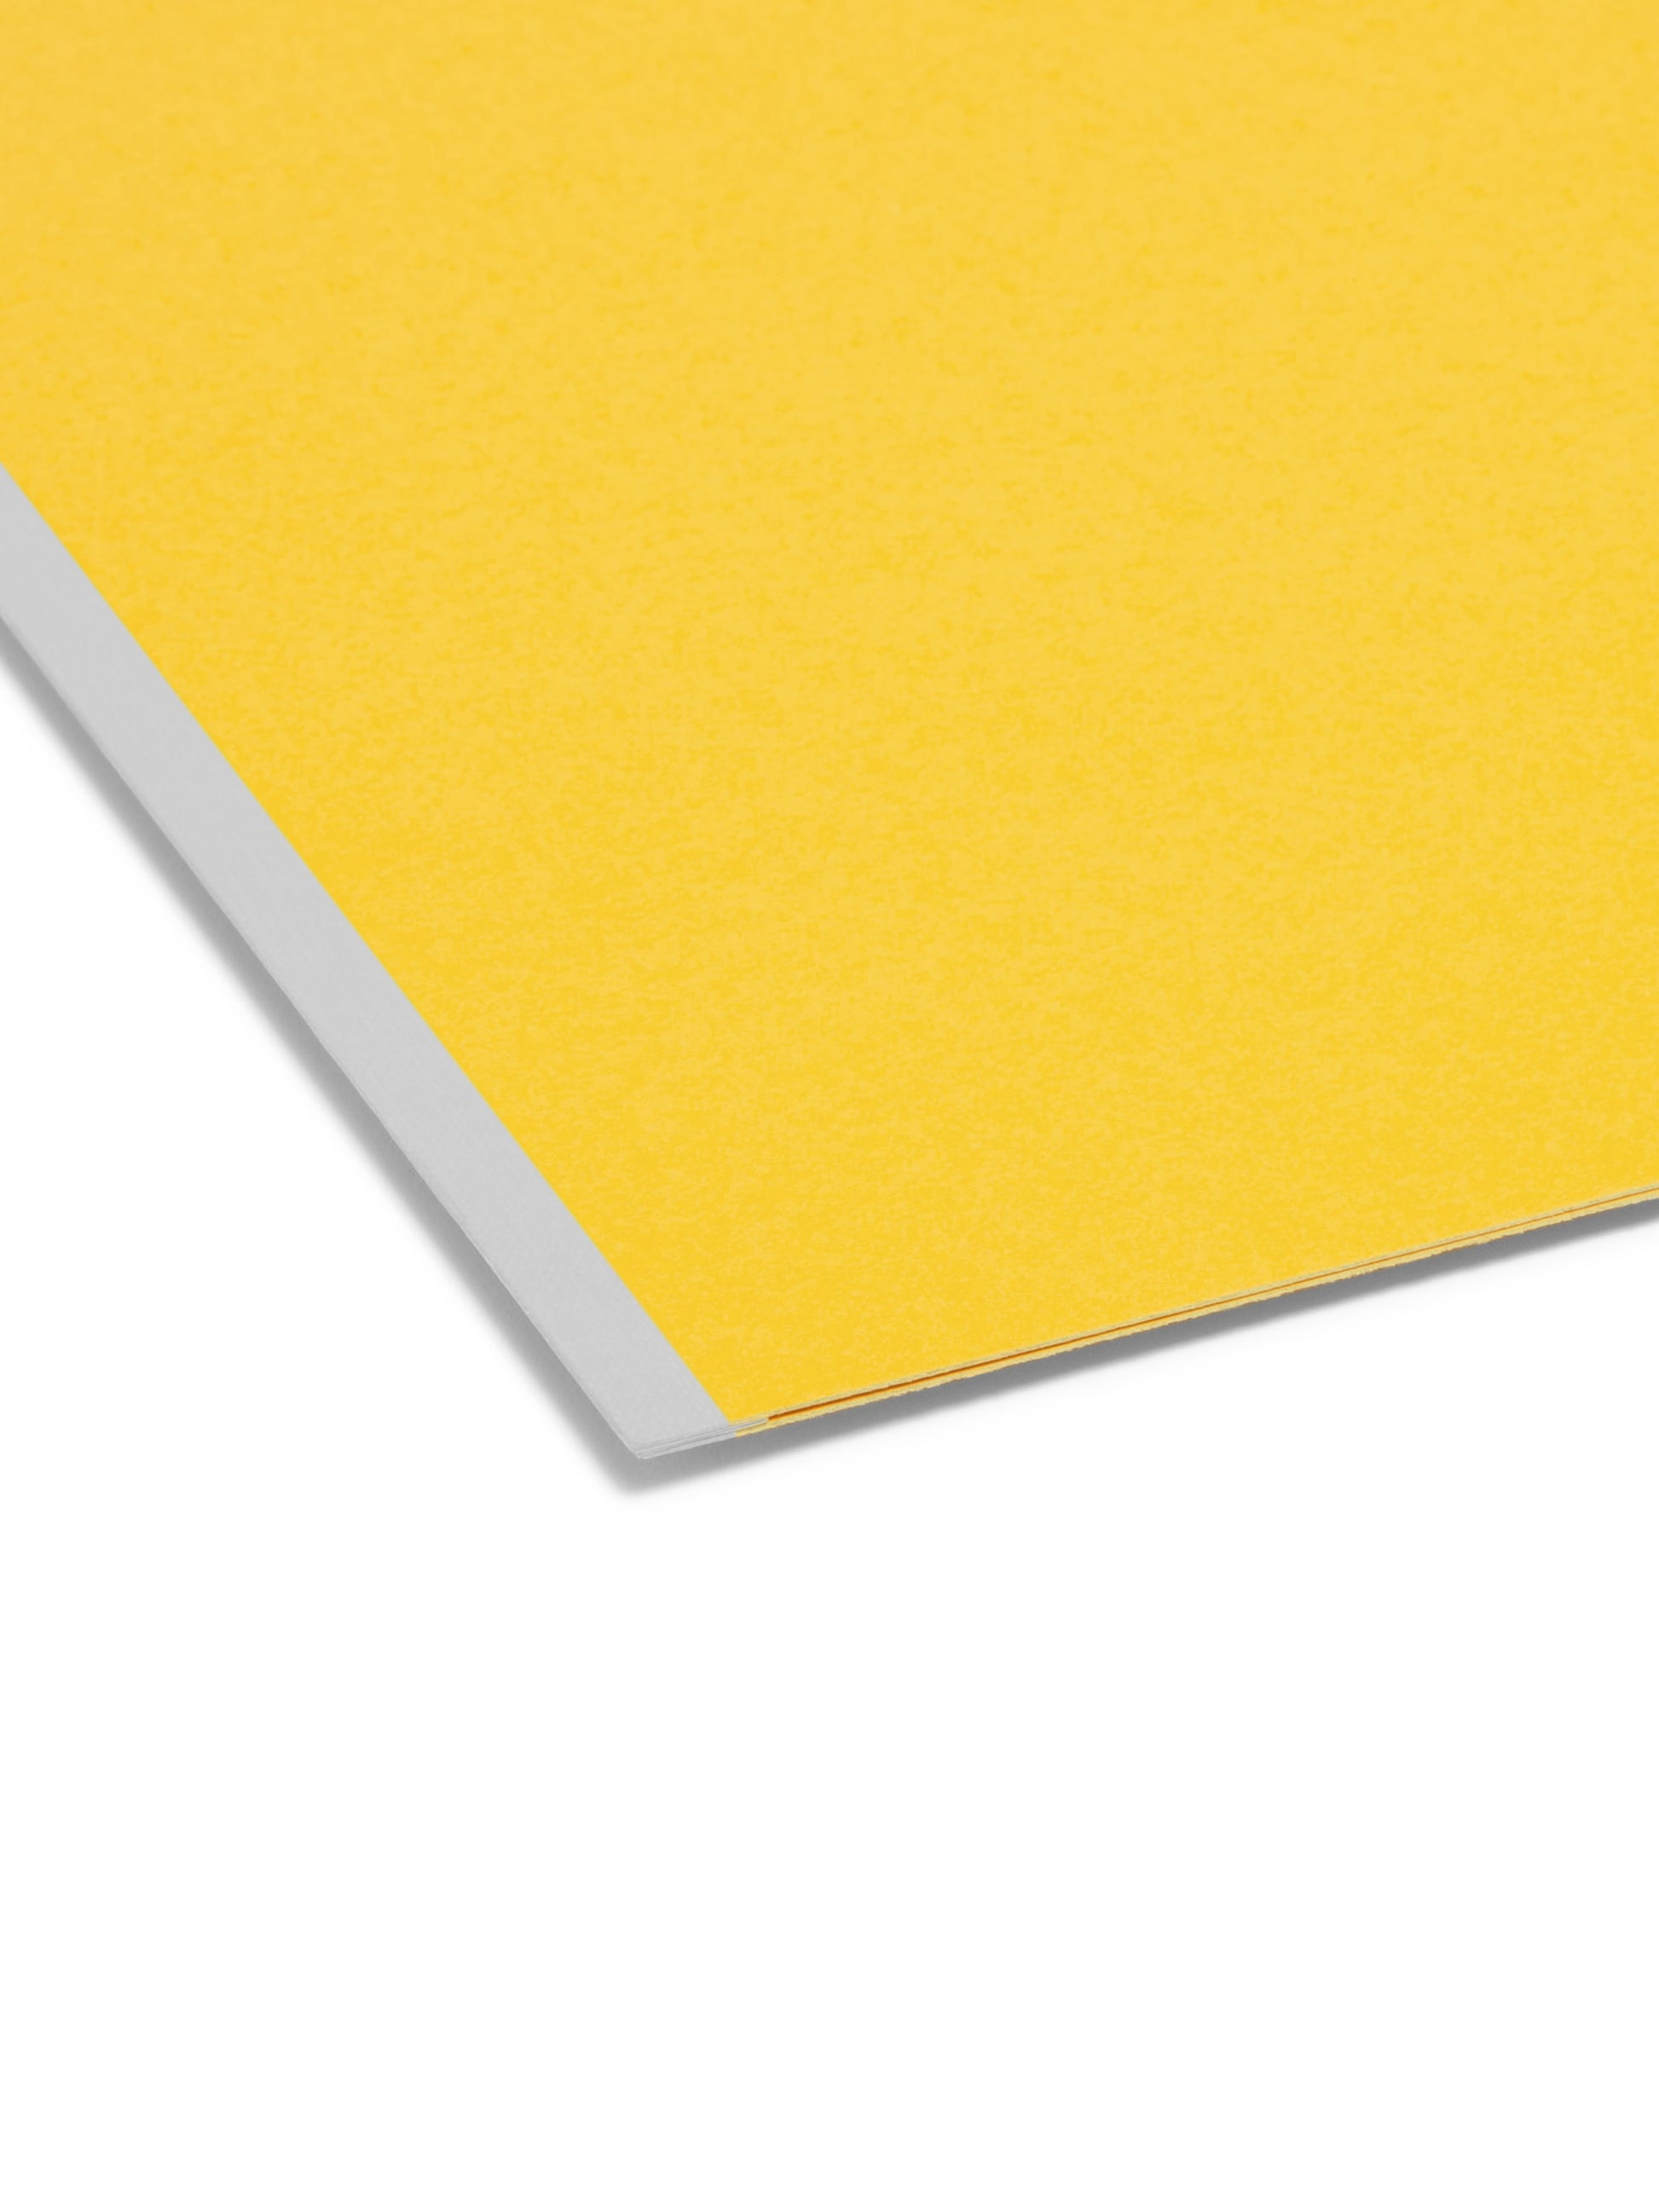 SafeSHIELD® Pressboard Fastener File Folders, 2 inch Expansion, 1/3-Cut Tab, Yellow Color, Legal Size, Set of 25, 086486199391